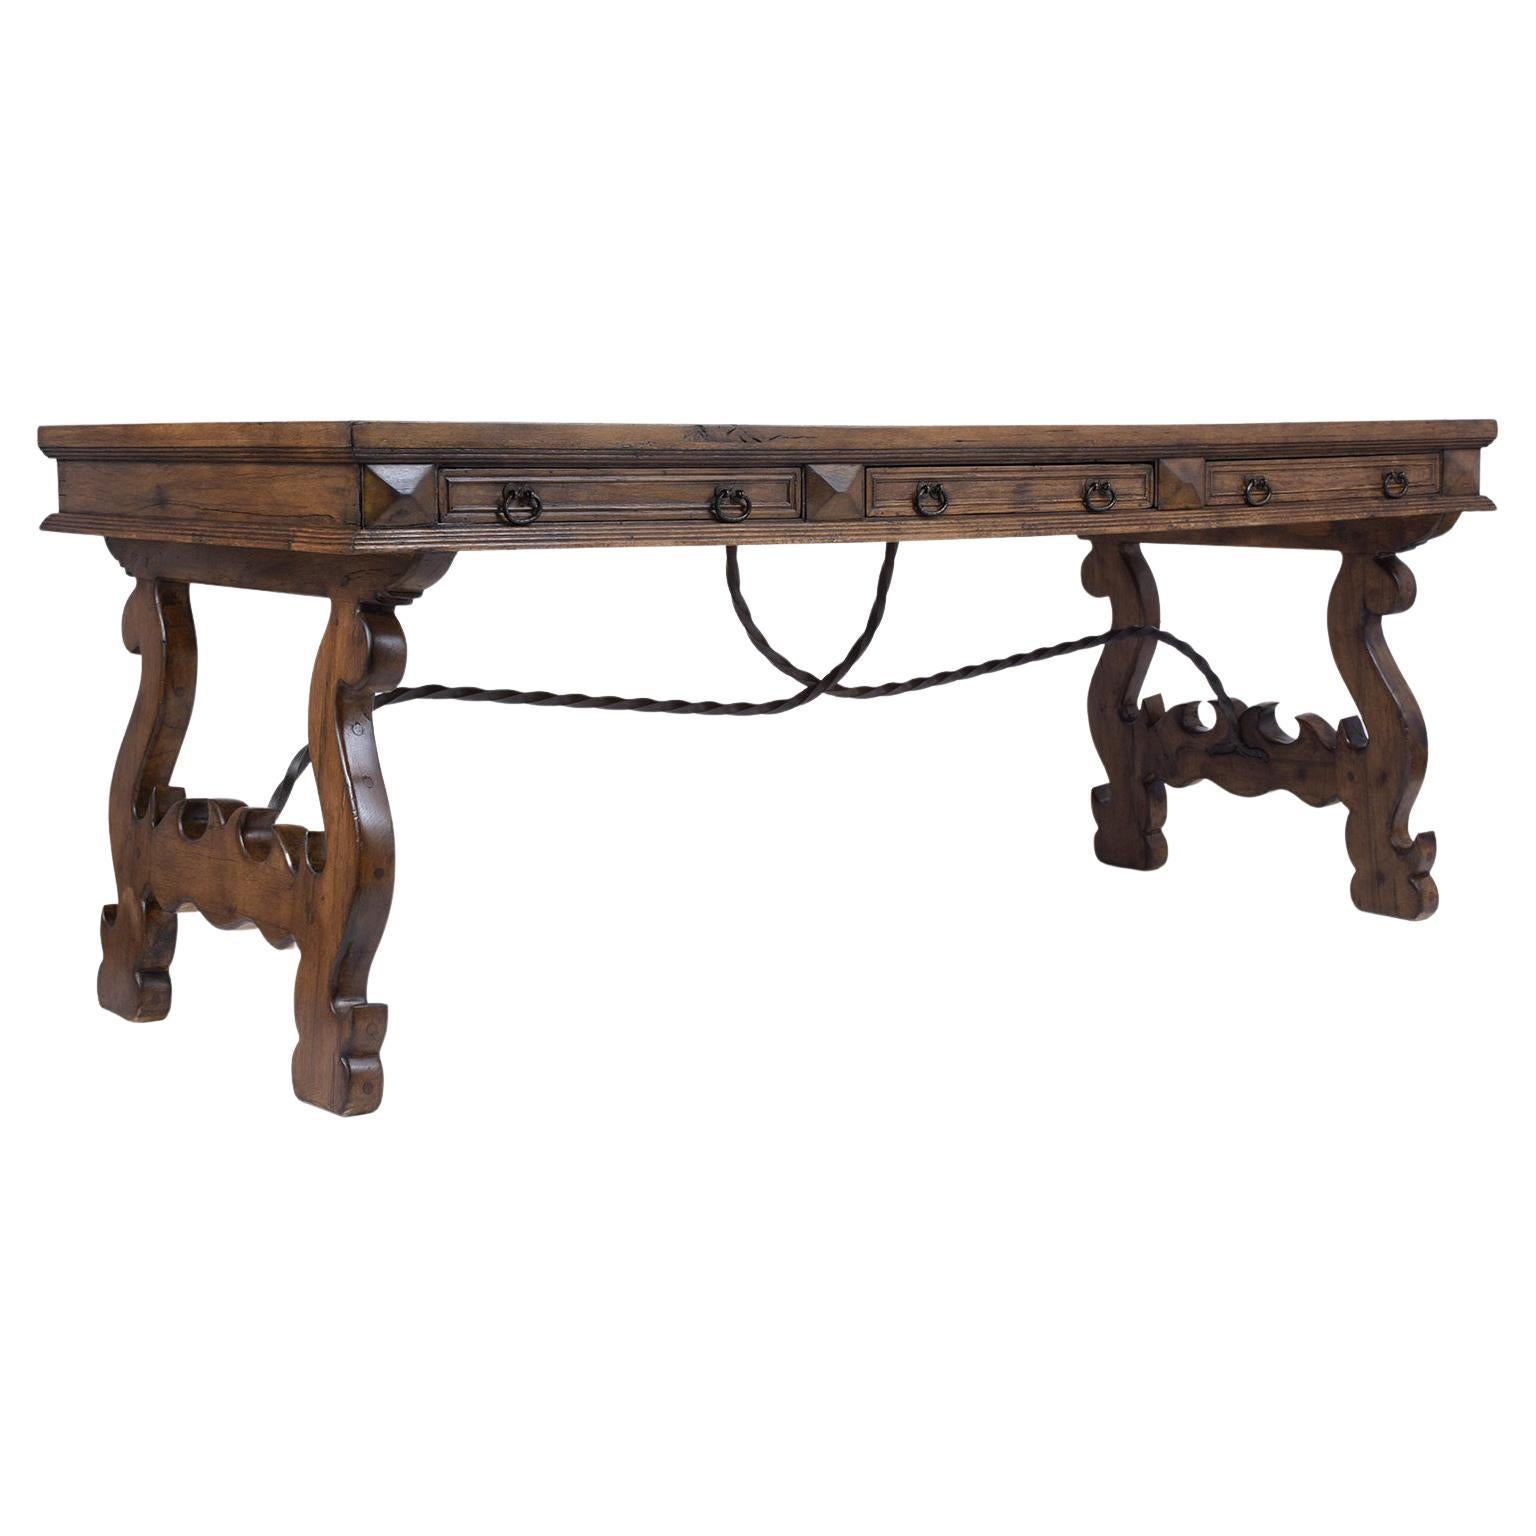 Vintage Spanish Colonial Oak Dining Table